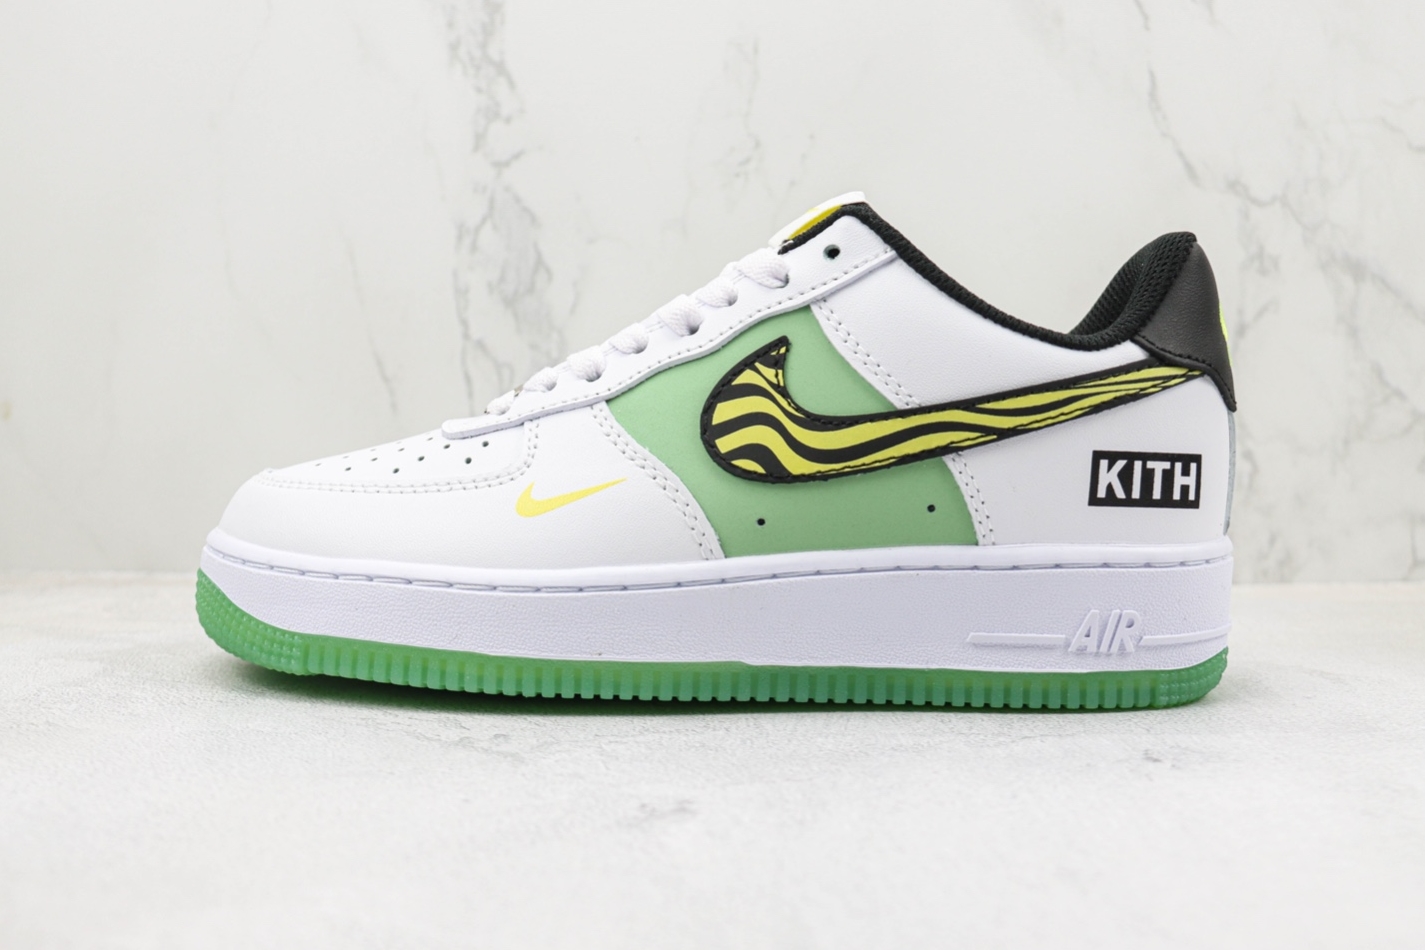 Nike Air Force 1 07 Low White Black Grey Green Shoes BS9055-827 - Shop Now!